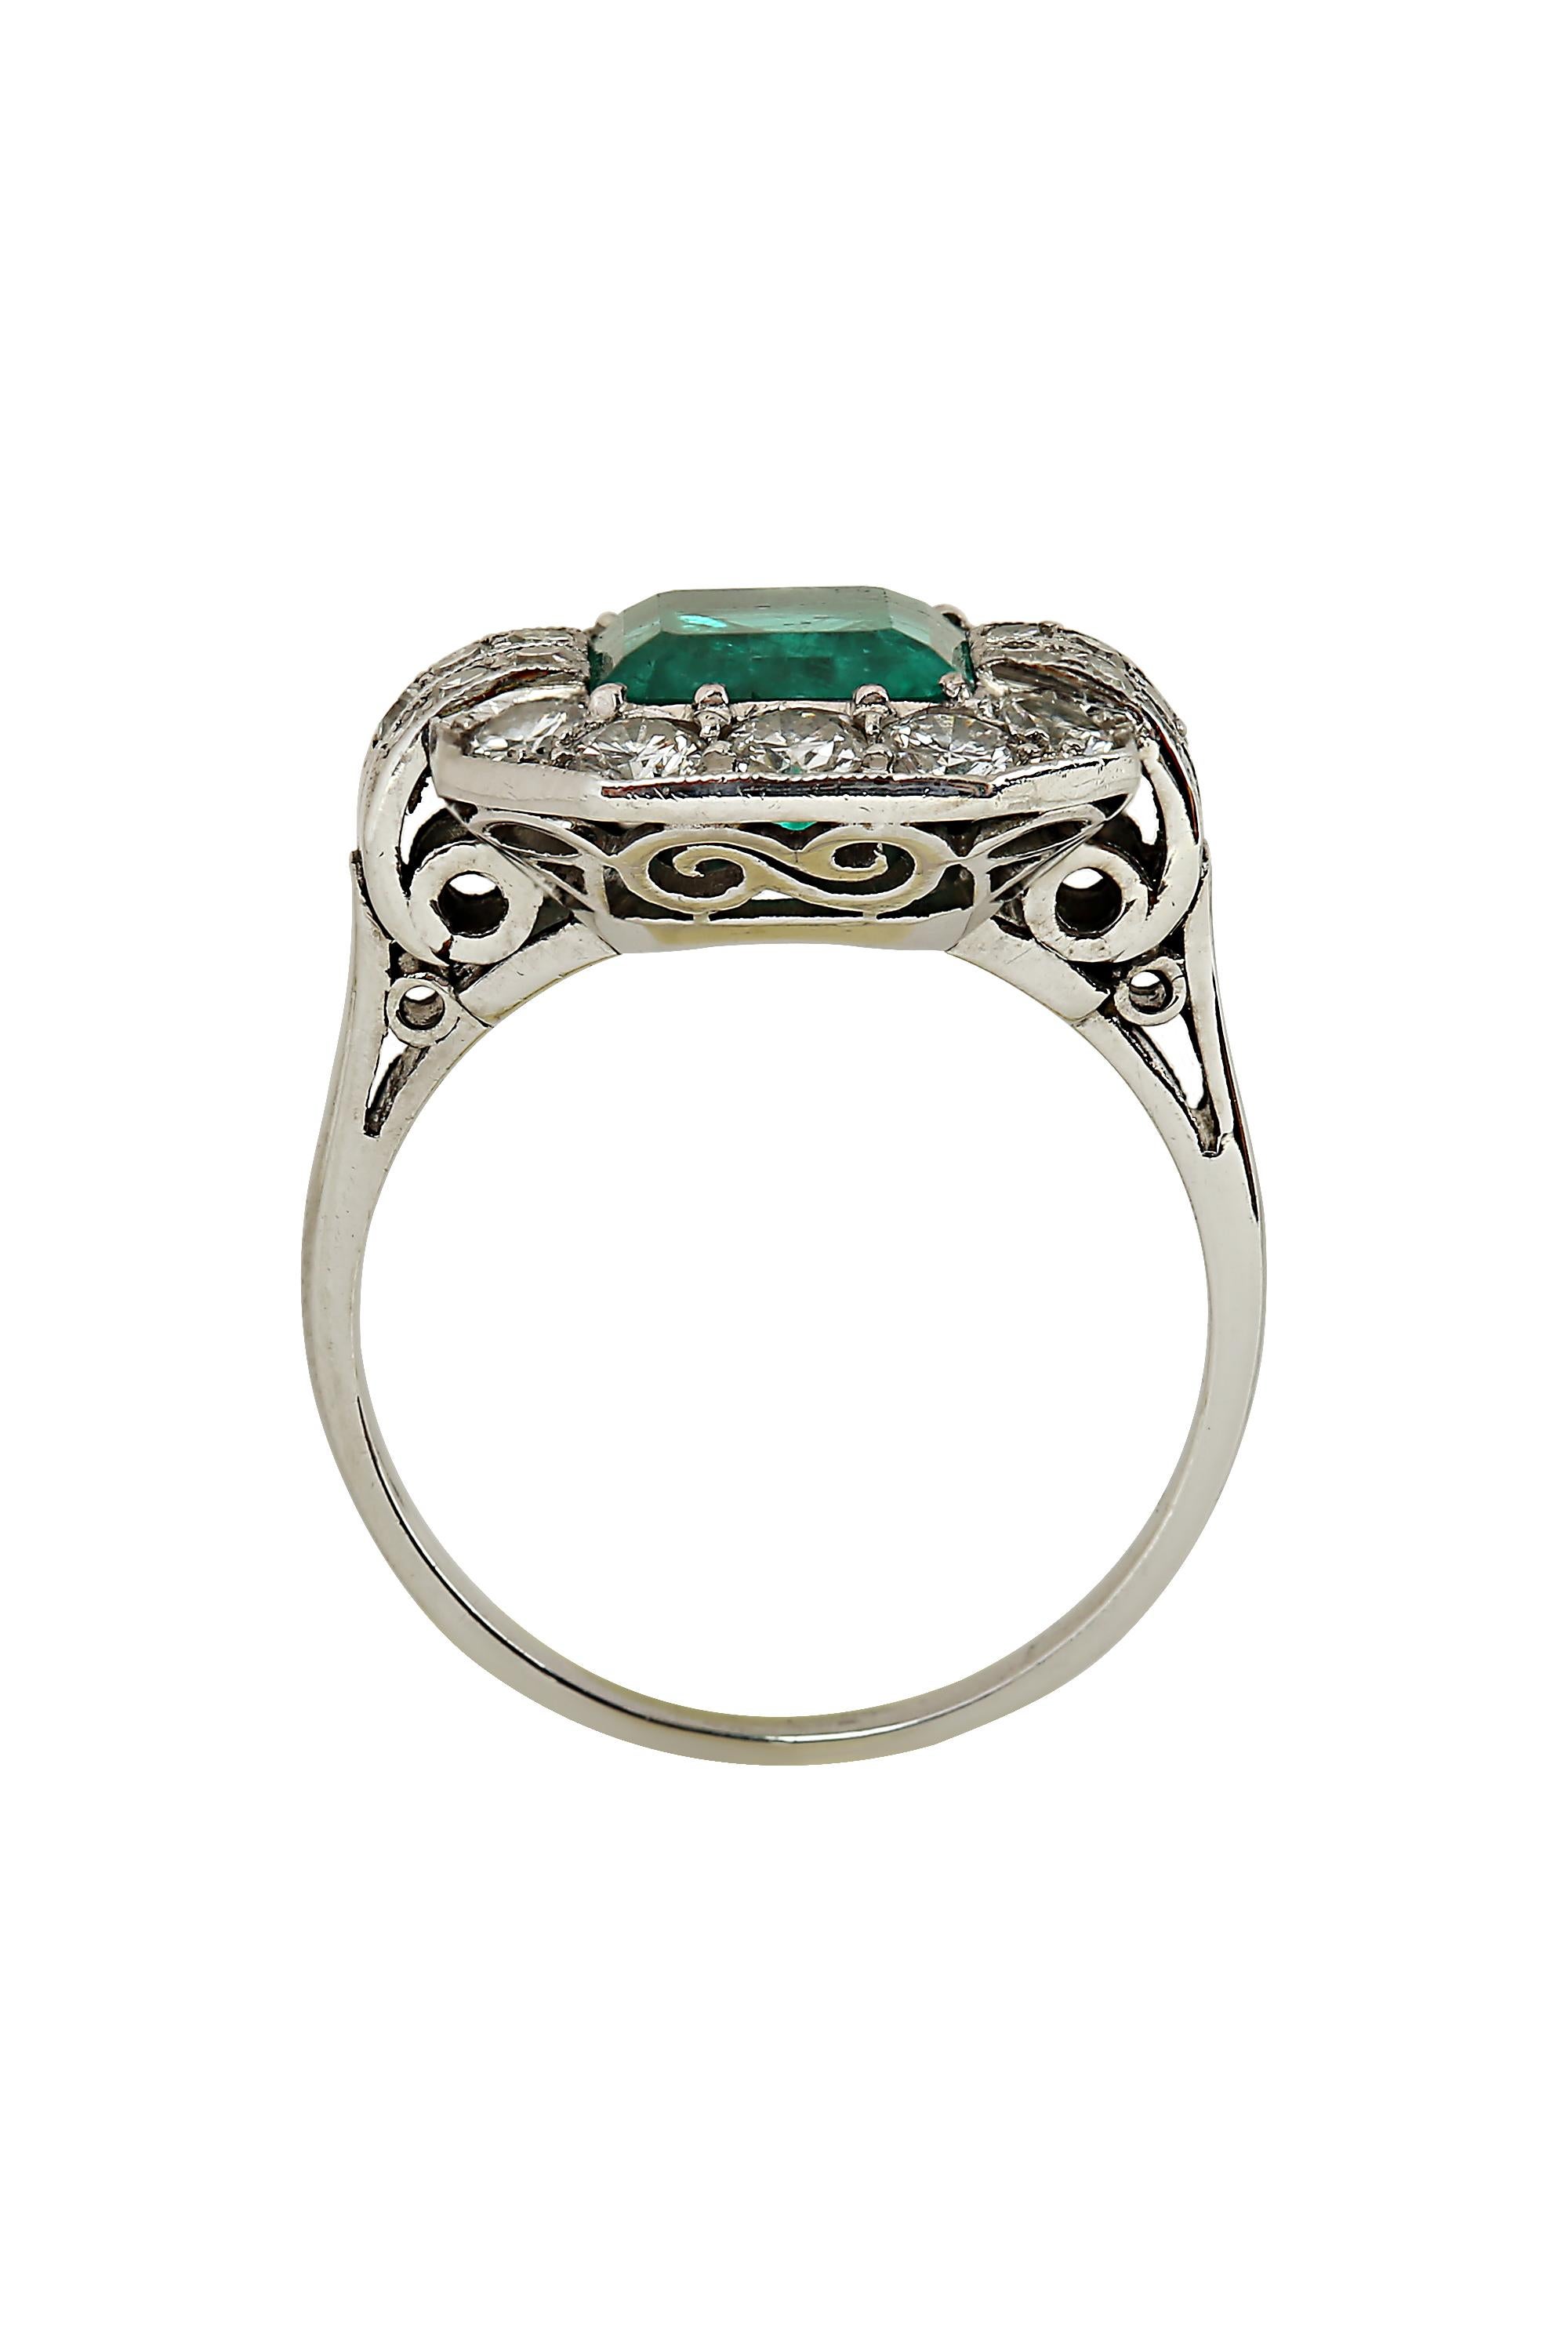 A sublime Art Deco ring highlighting a richly saturated octagonal 2 carat Colombian emerald in a chic geometric diamond mounting fabricated in 18 karat white gold. With GIA report # 1166842555 stating that the emerald is Colombian in origin with F1